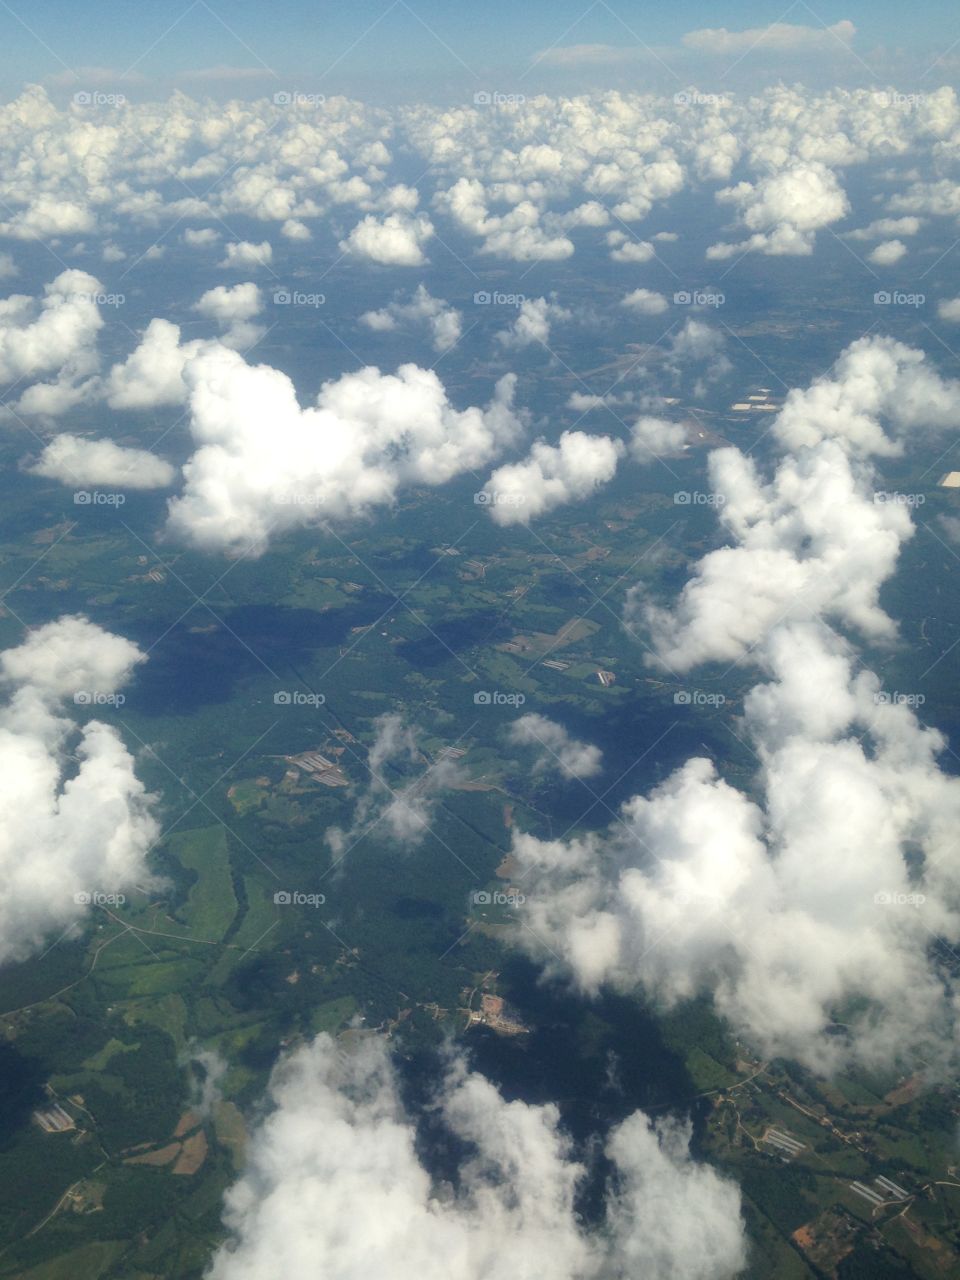 Clouds over the landscape